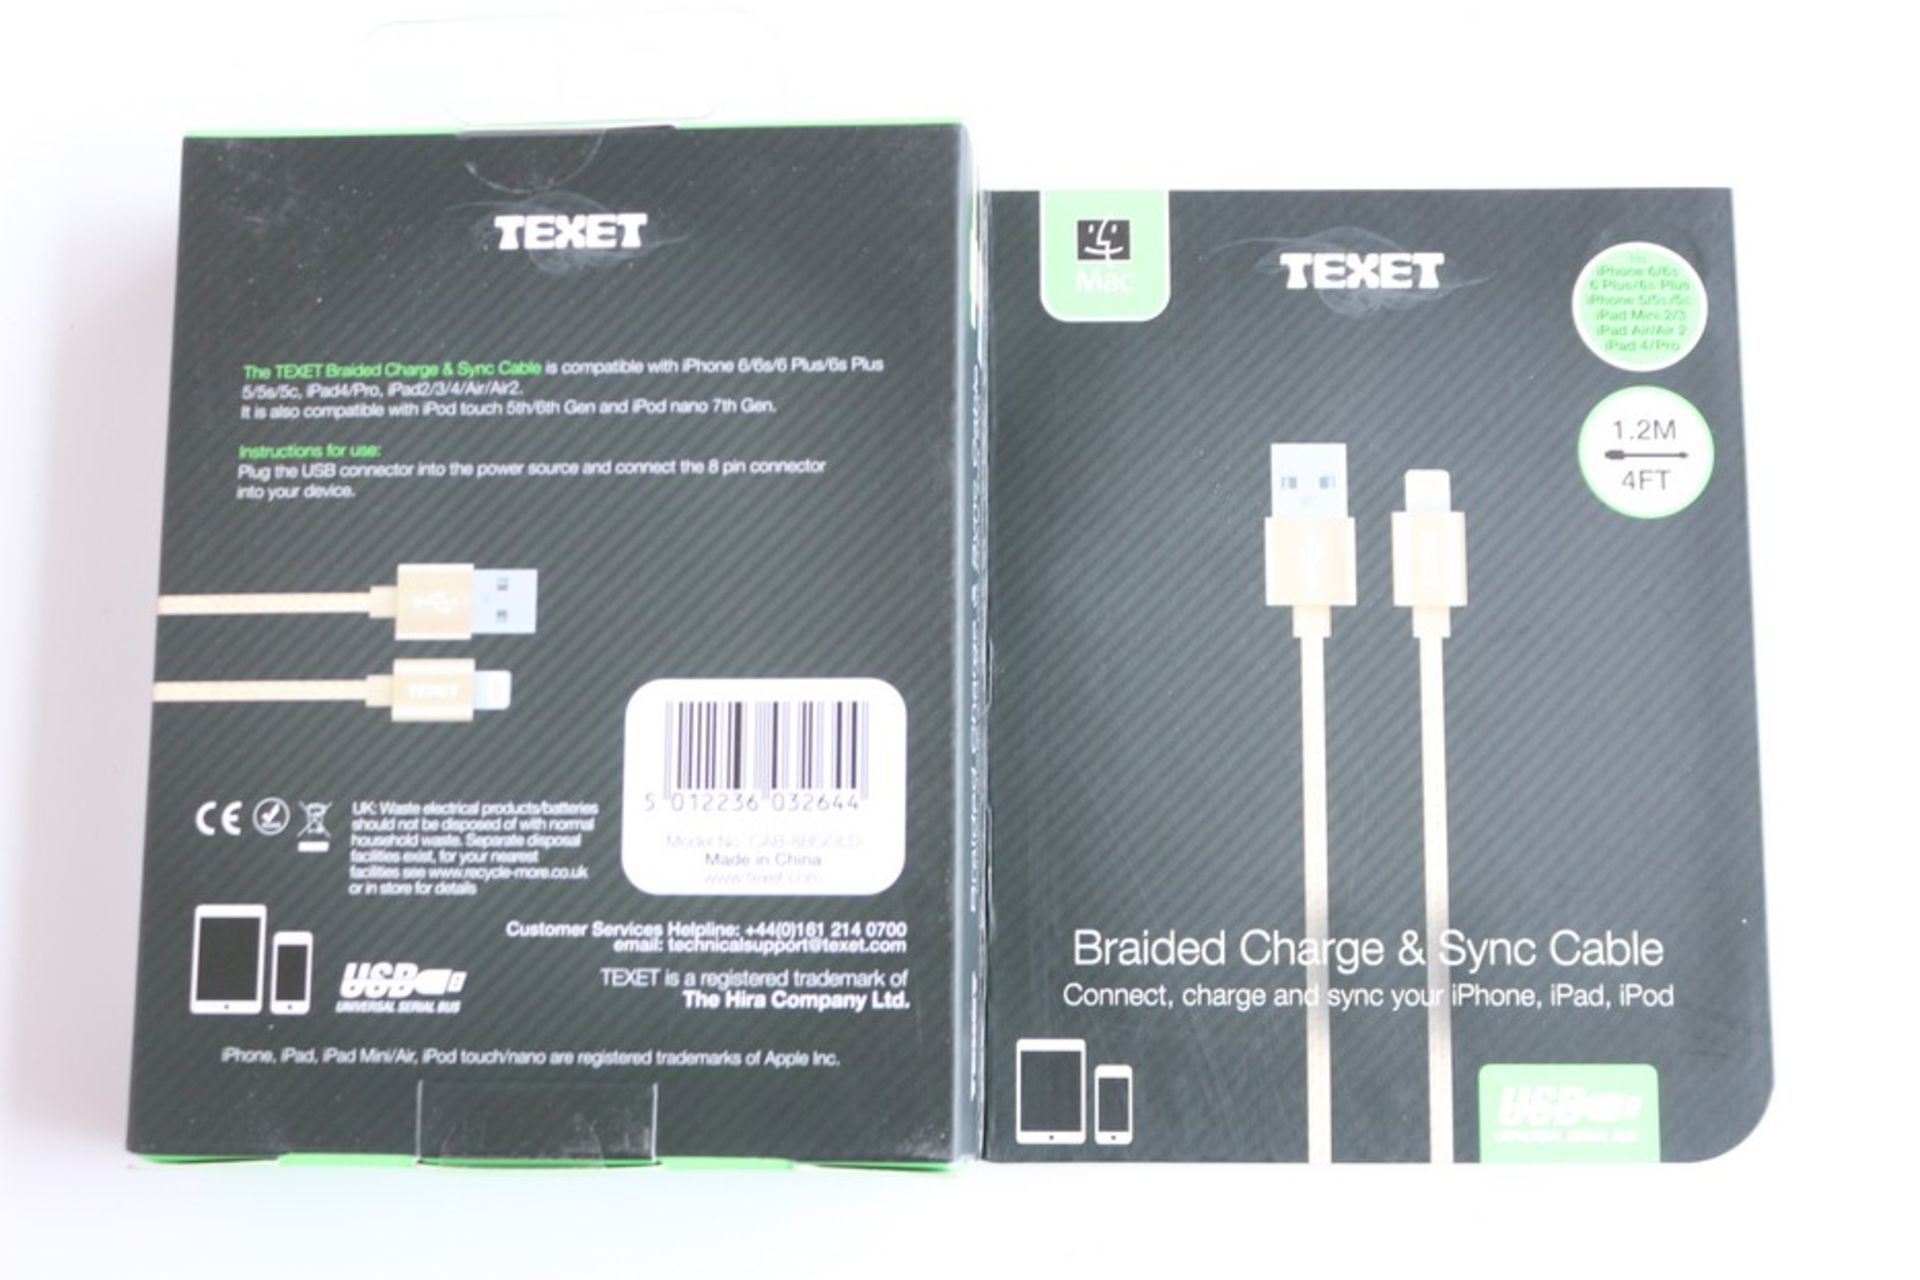 10X BOXED UNUSED FACTORY SEALED TEXET 1.2M/4FT BRAIDED CHARGE & SYNC CABLES USB- IPHONE/IPAD/IPOD - Image 4 of 4